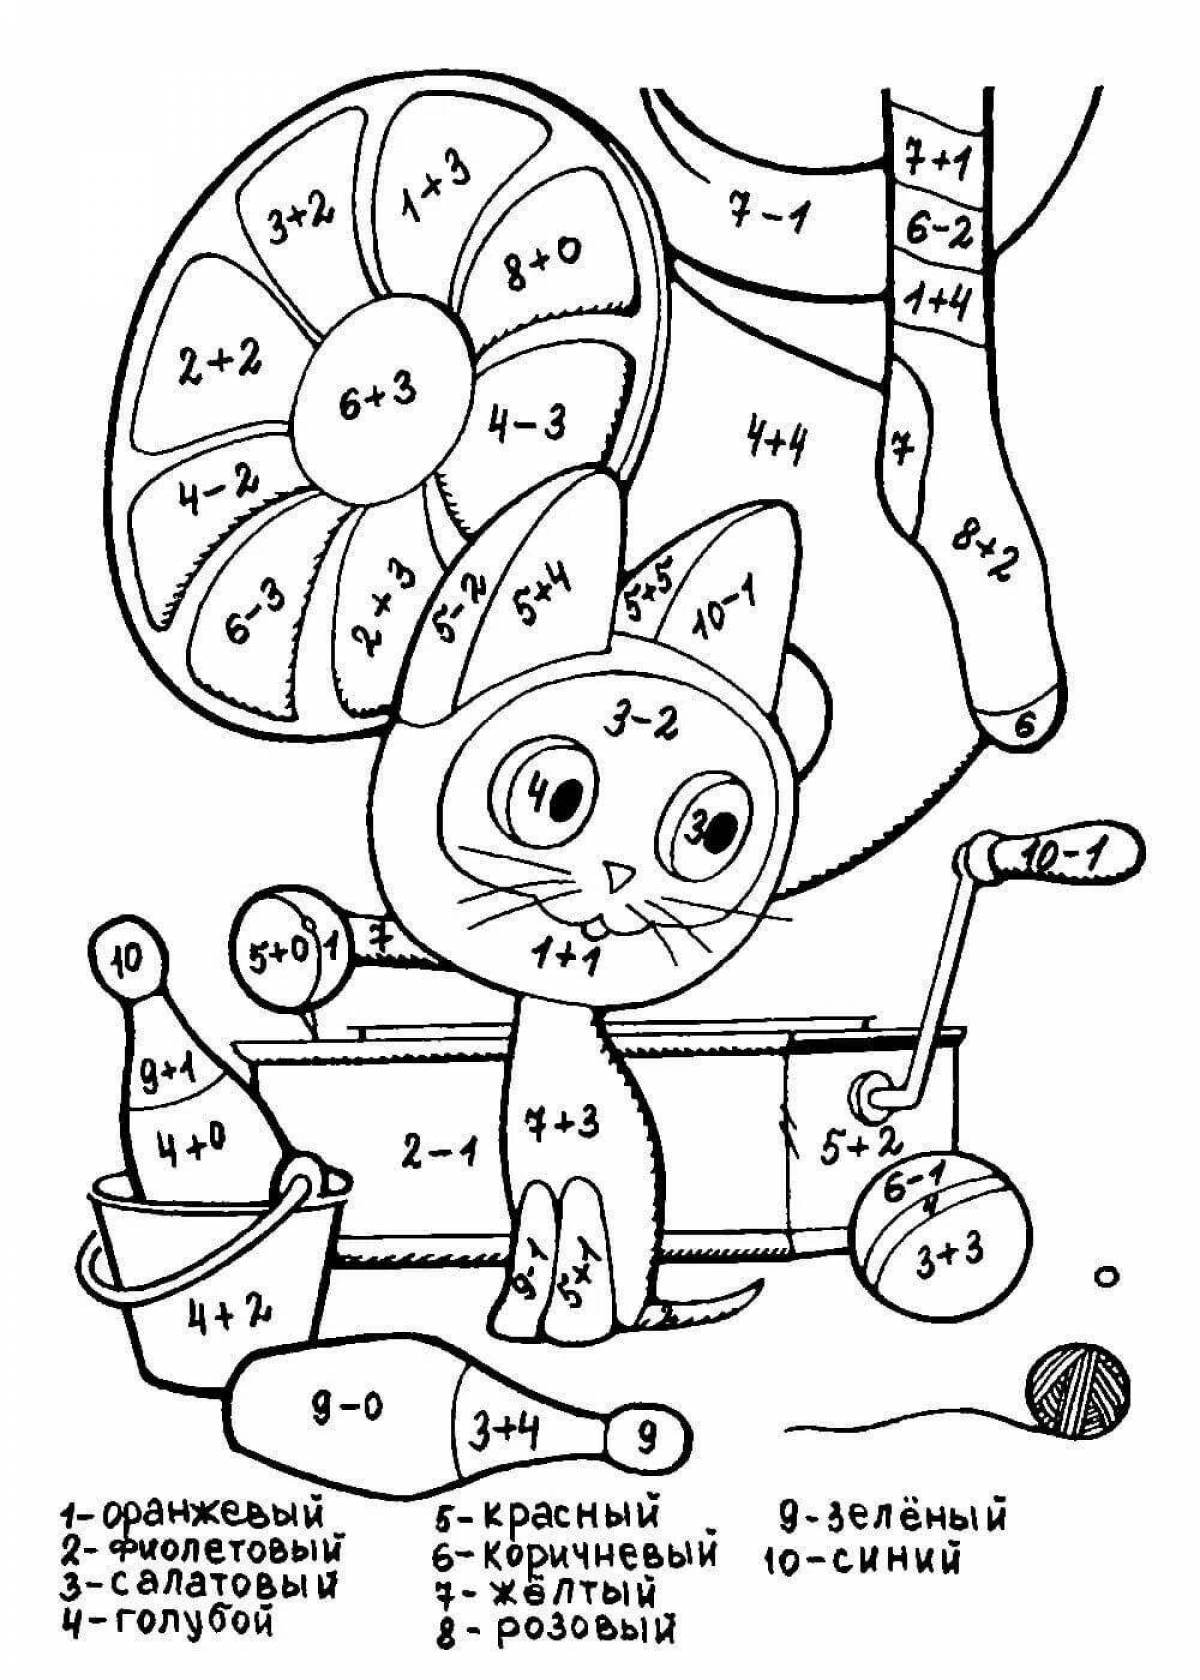 Creative math problem coloring page